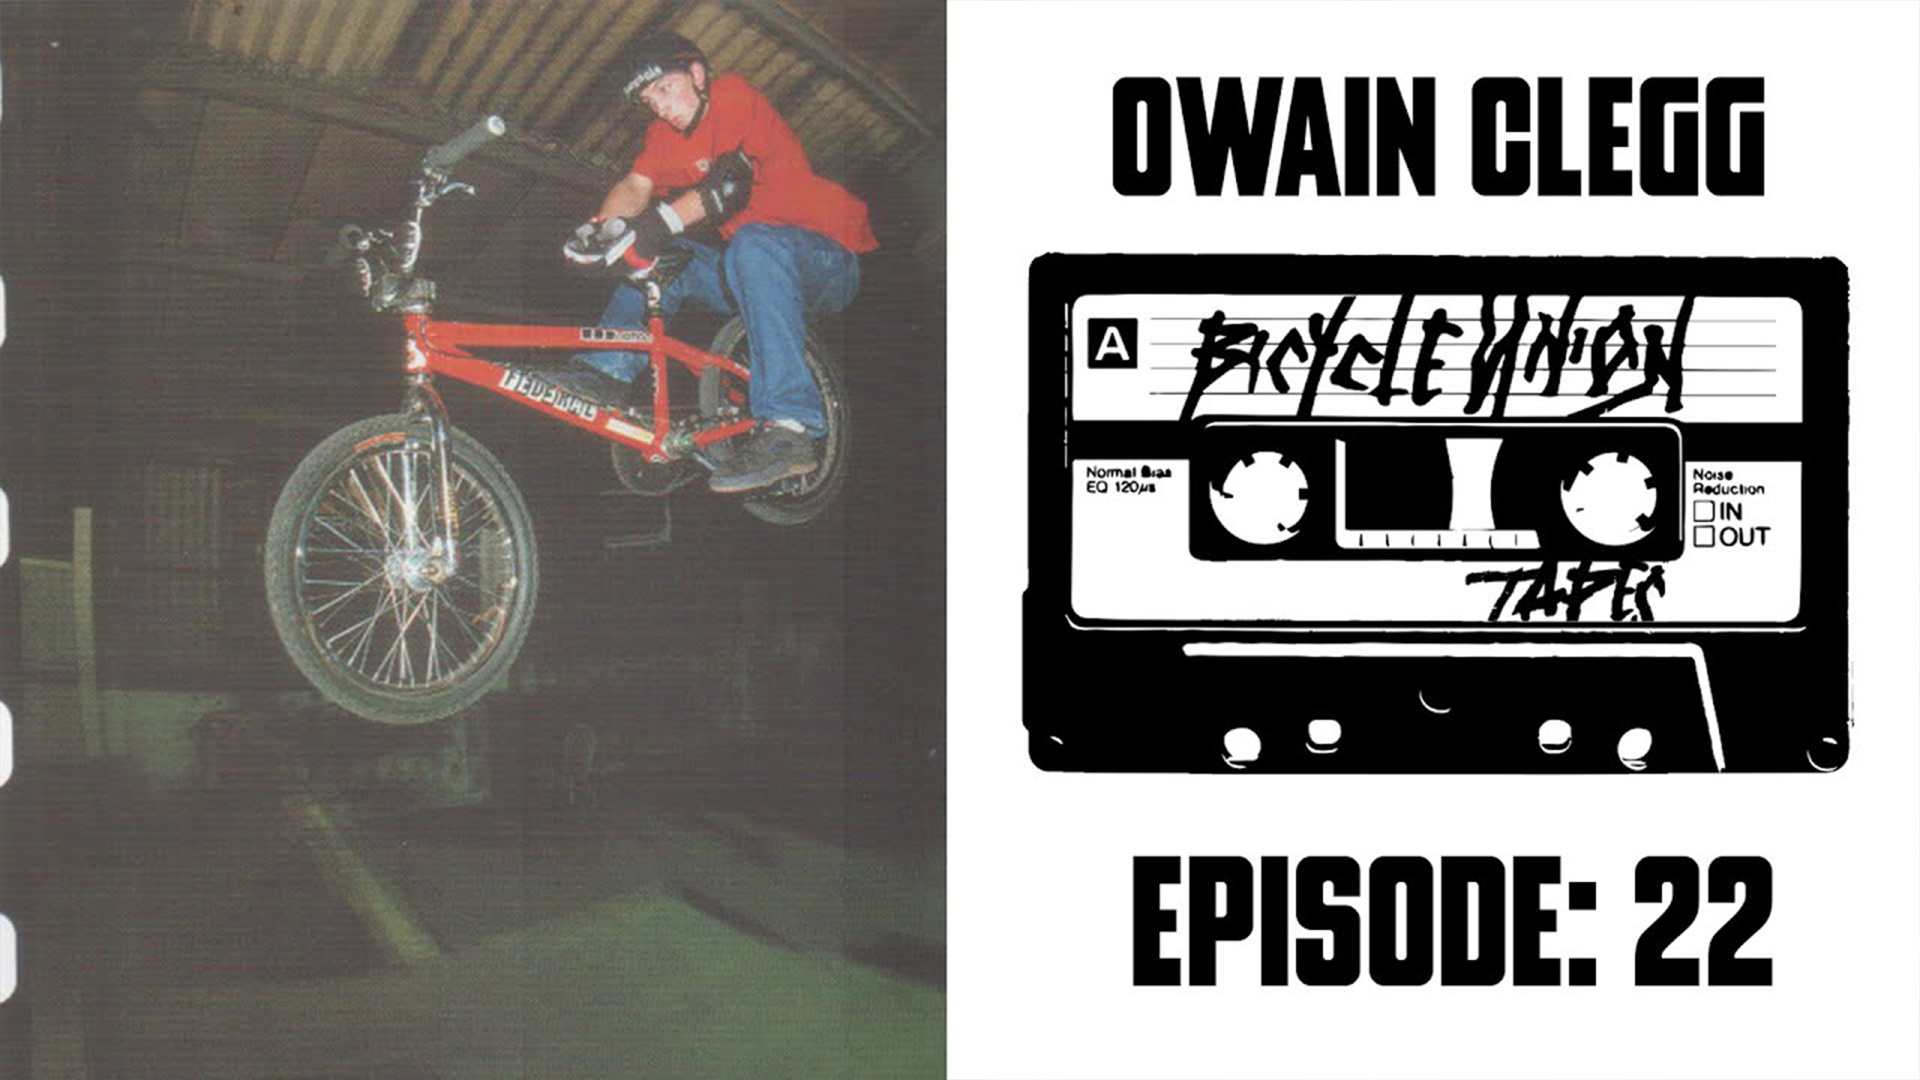 UNION TAPES: Owain Clegg